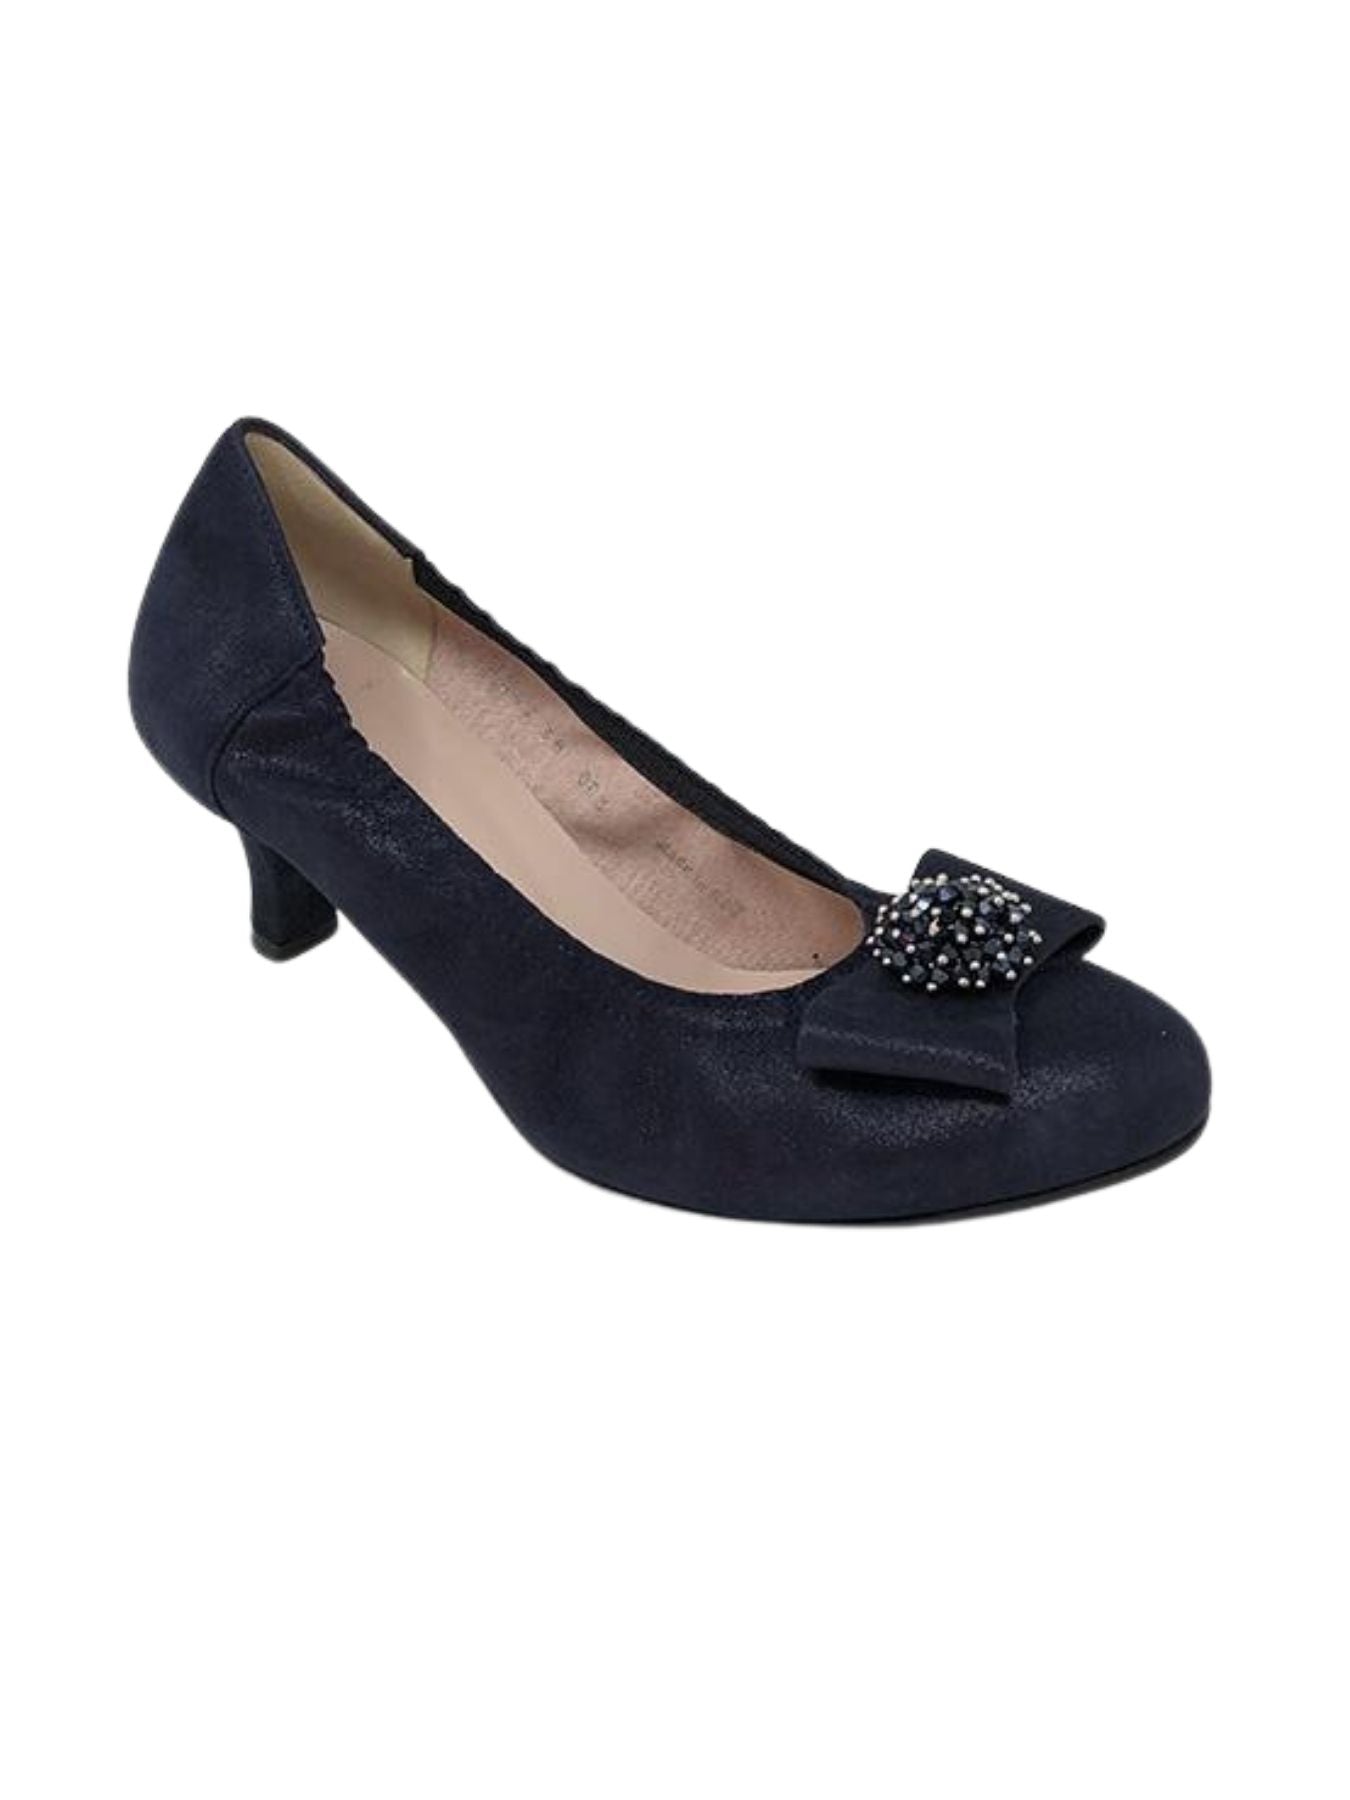 Navy Low Heel With Bow On Toe